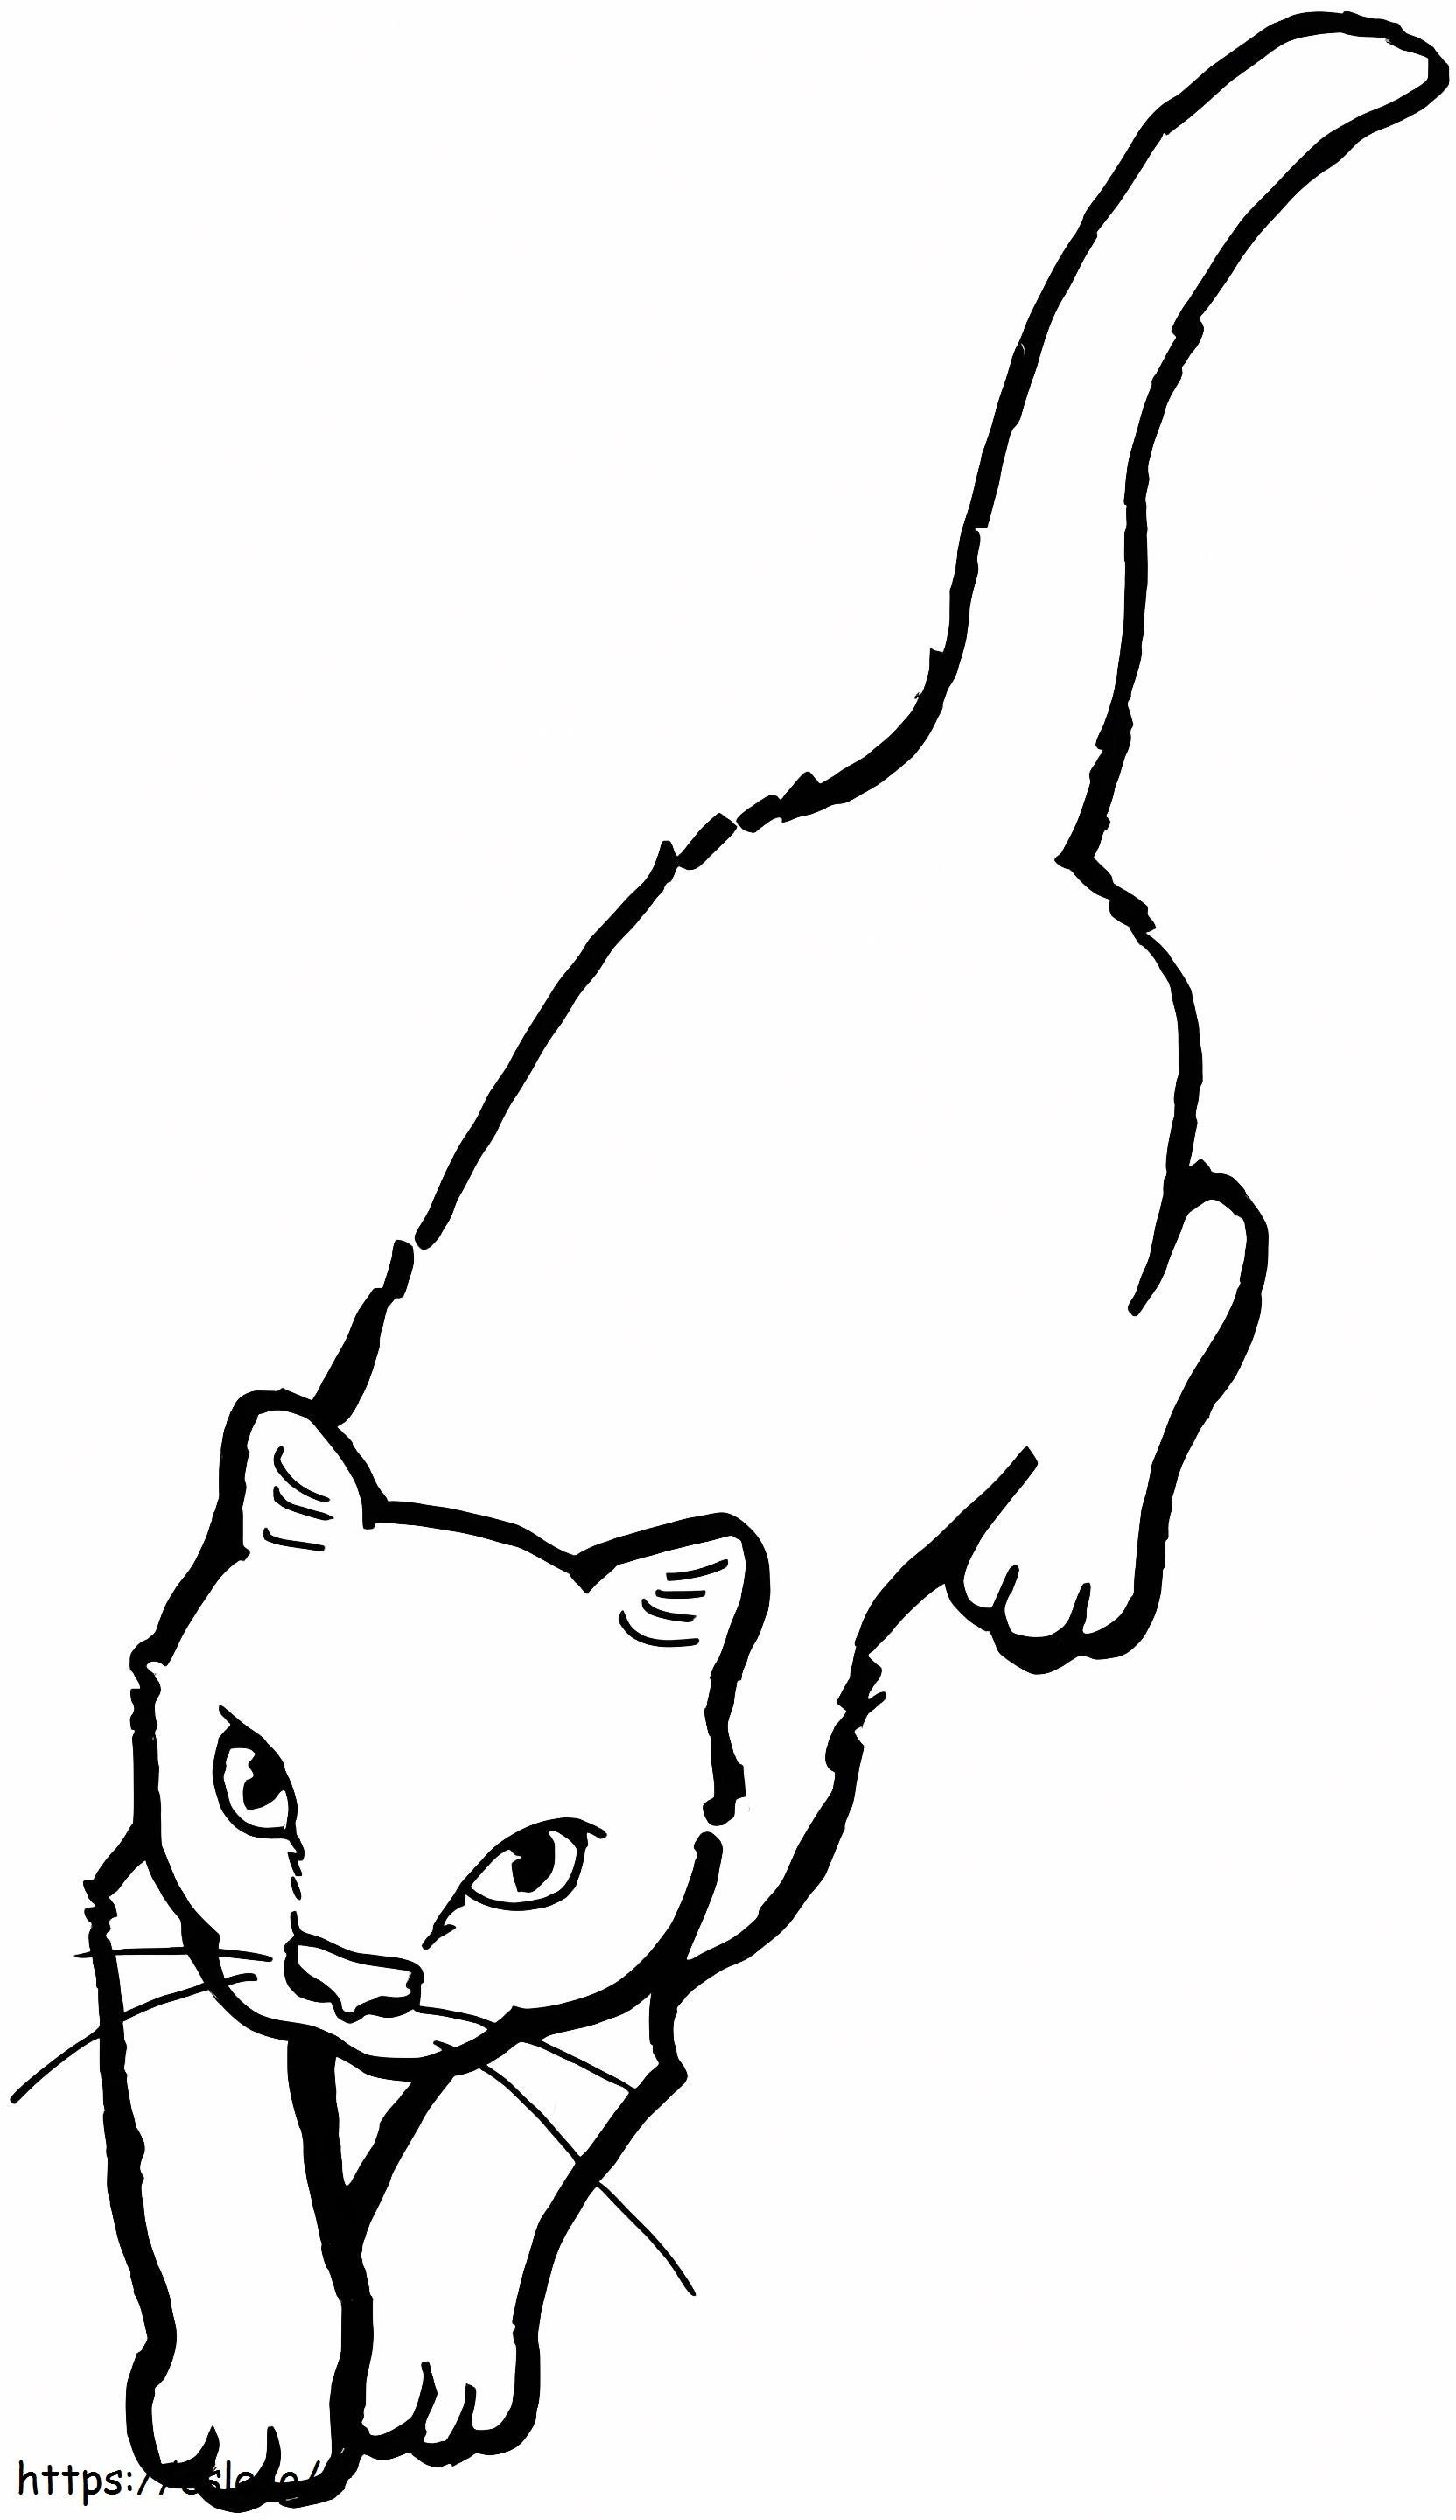 A Cat coloring page